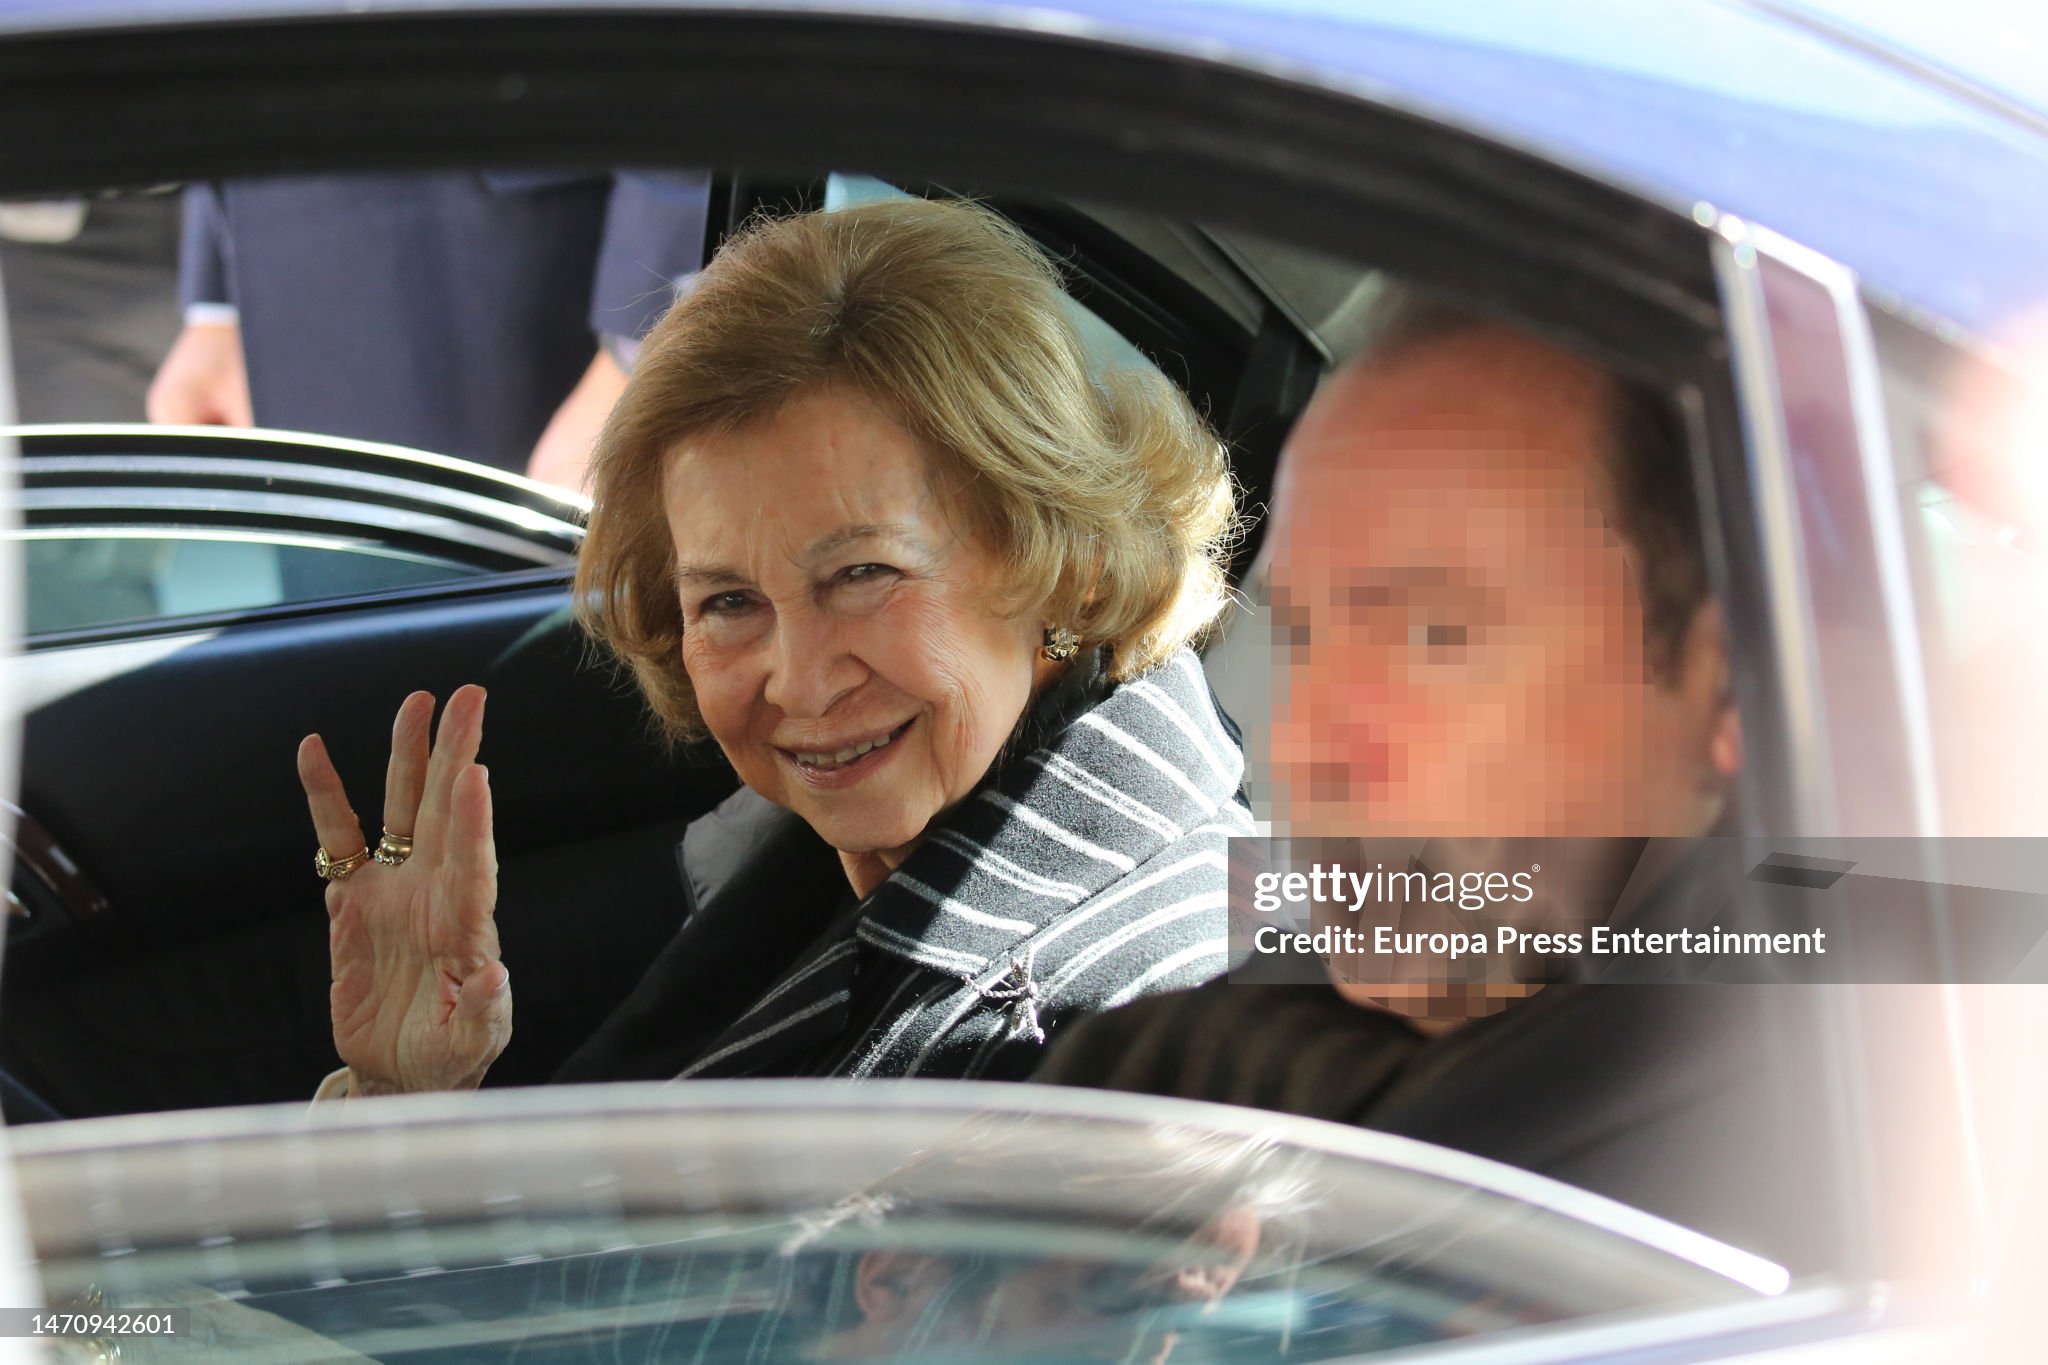 queen-sofia-at-the-exit-of-the-traditional-kissing-of-jesus-of-medinaceli-on-march-3-in-madrid.jpg